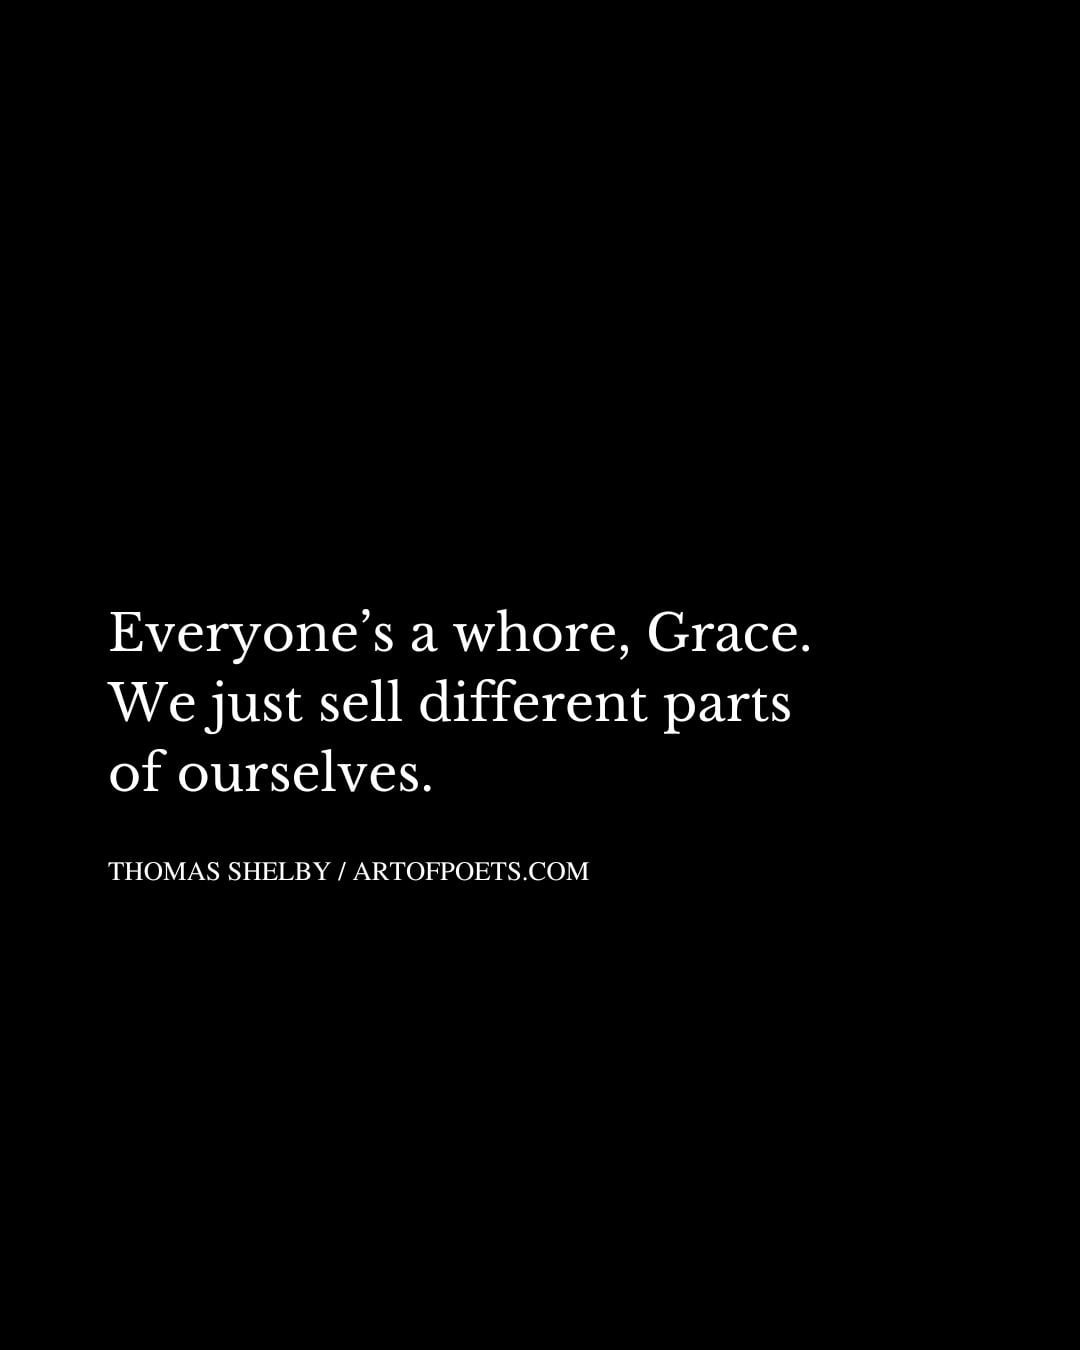 Everyones a whore Grace. We just sell different parts of ourselves